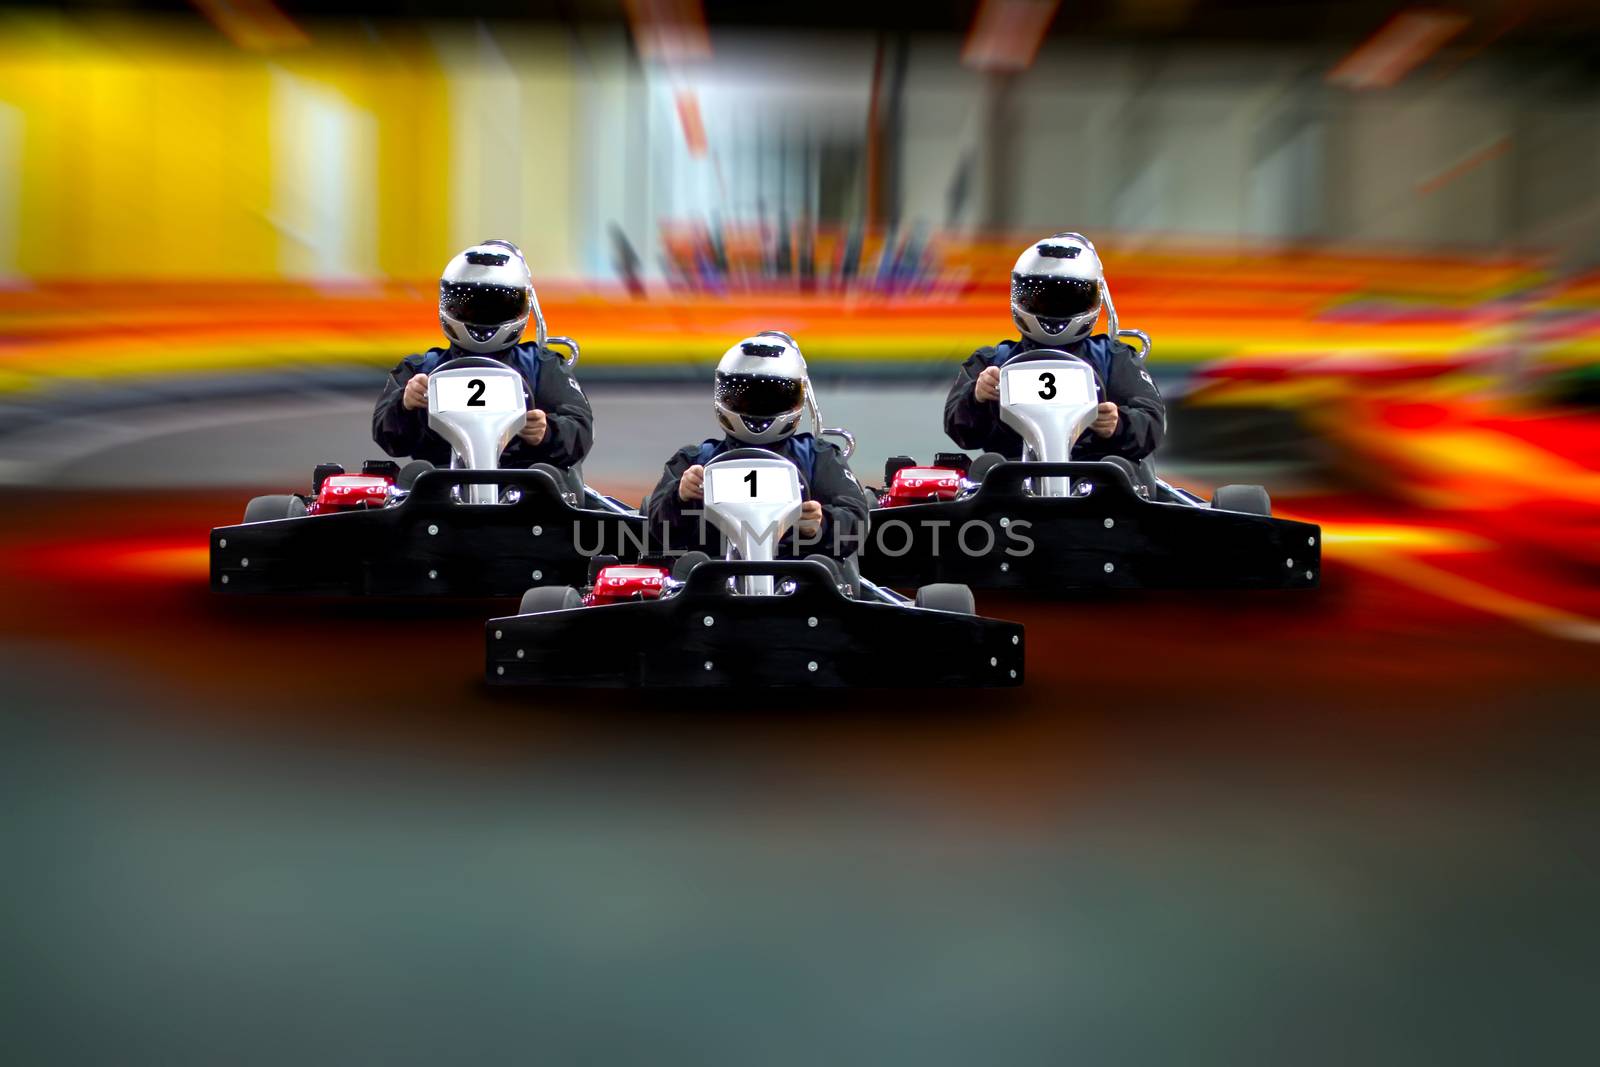 Three riders Go kart speed rive indoor race on the background of the track. Go kart indoor, cart racing fast, car where gokarting, we speed racing, racers banner Copy space.